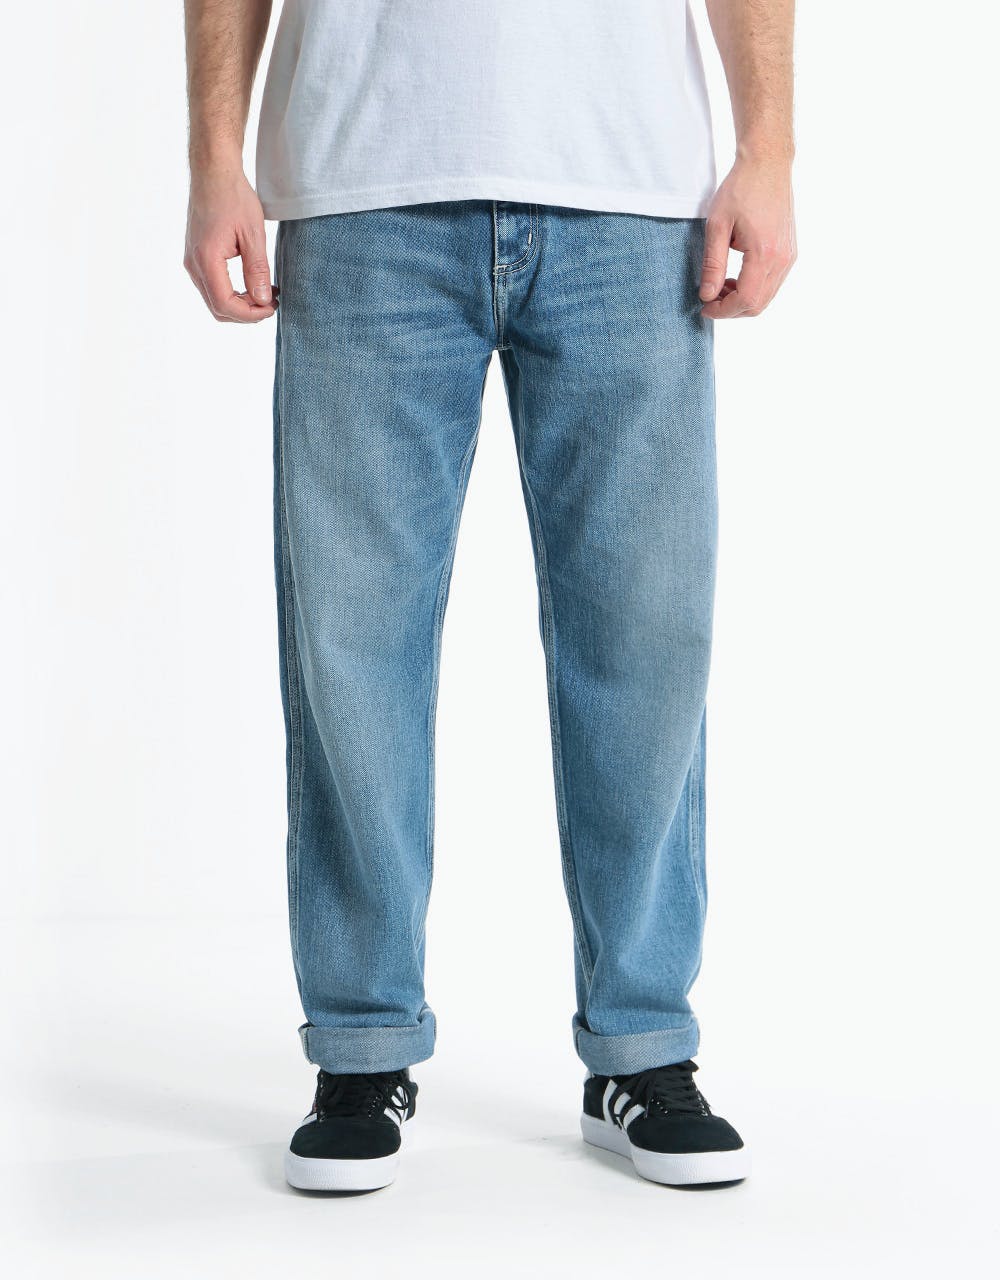 Carhartt WIP Penrod Pant - Blue (Worn Bleached) – Route One